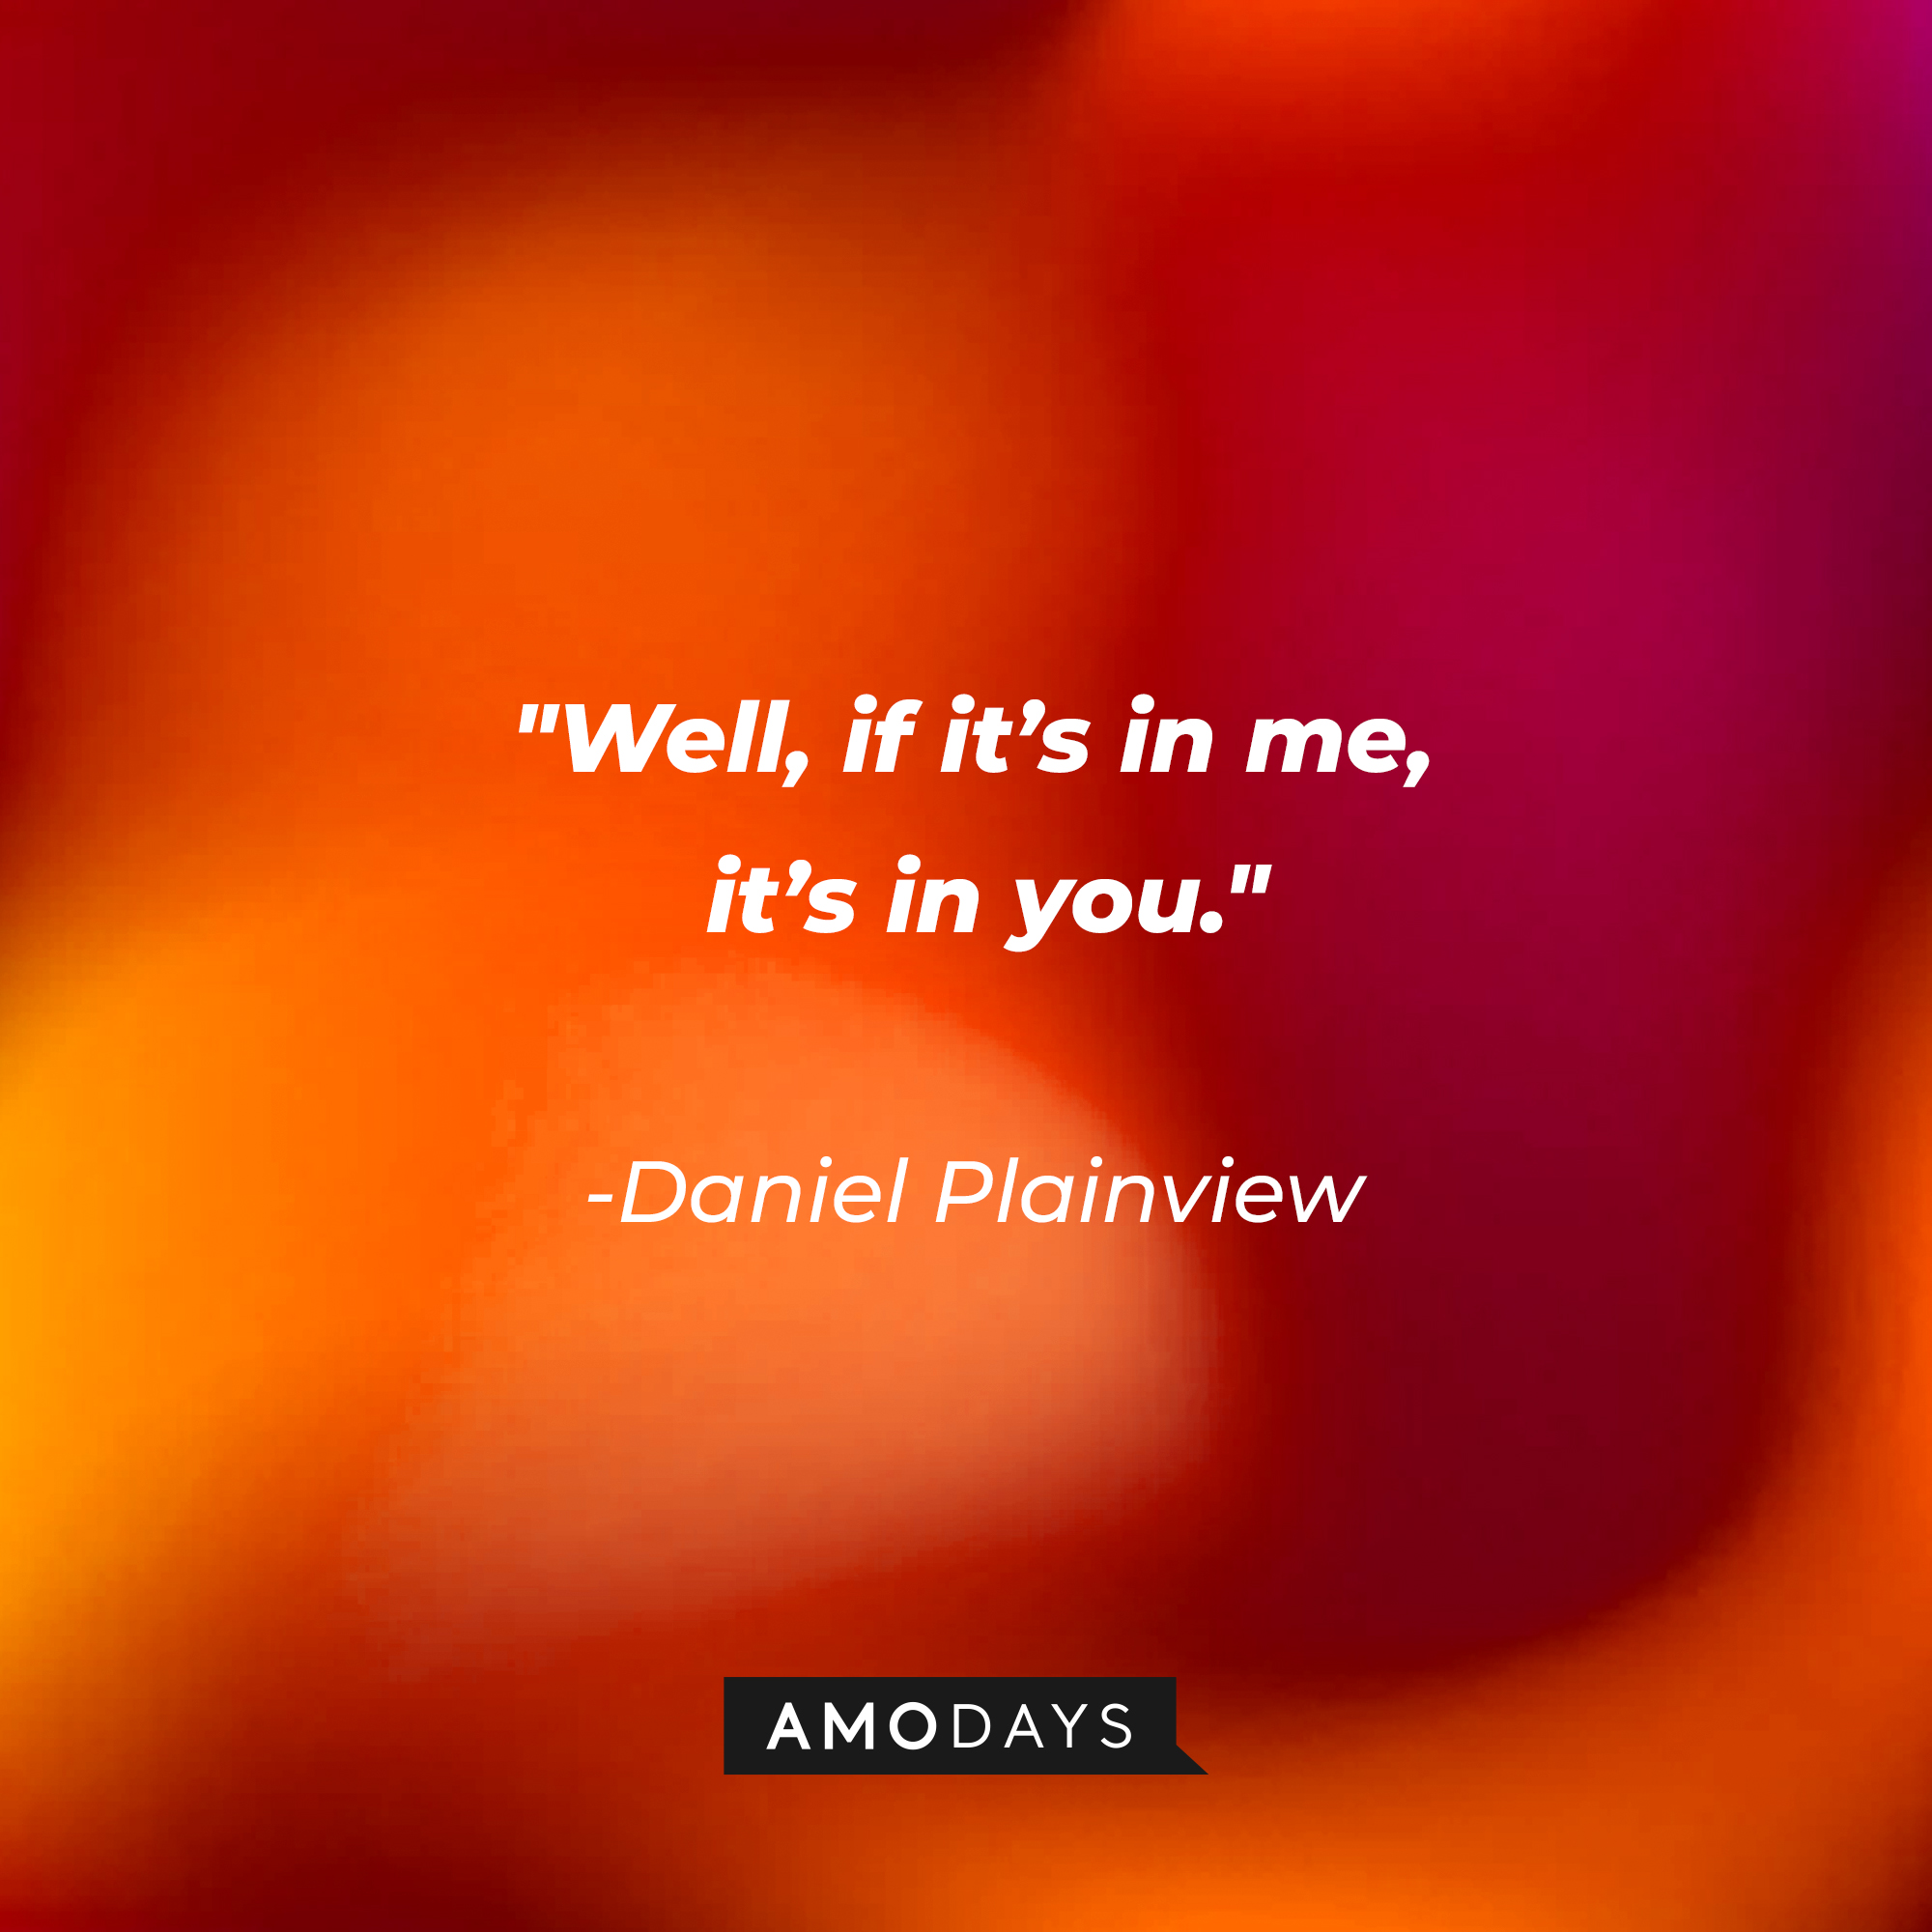 Daniel Plainview’s quote: “Well, if it’s in me, it’s in you.” | Source: AmoDays